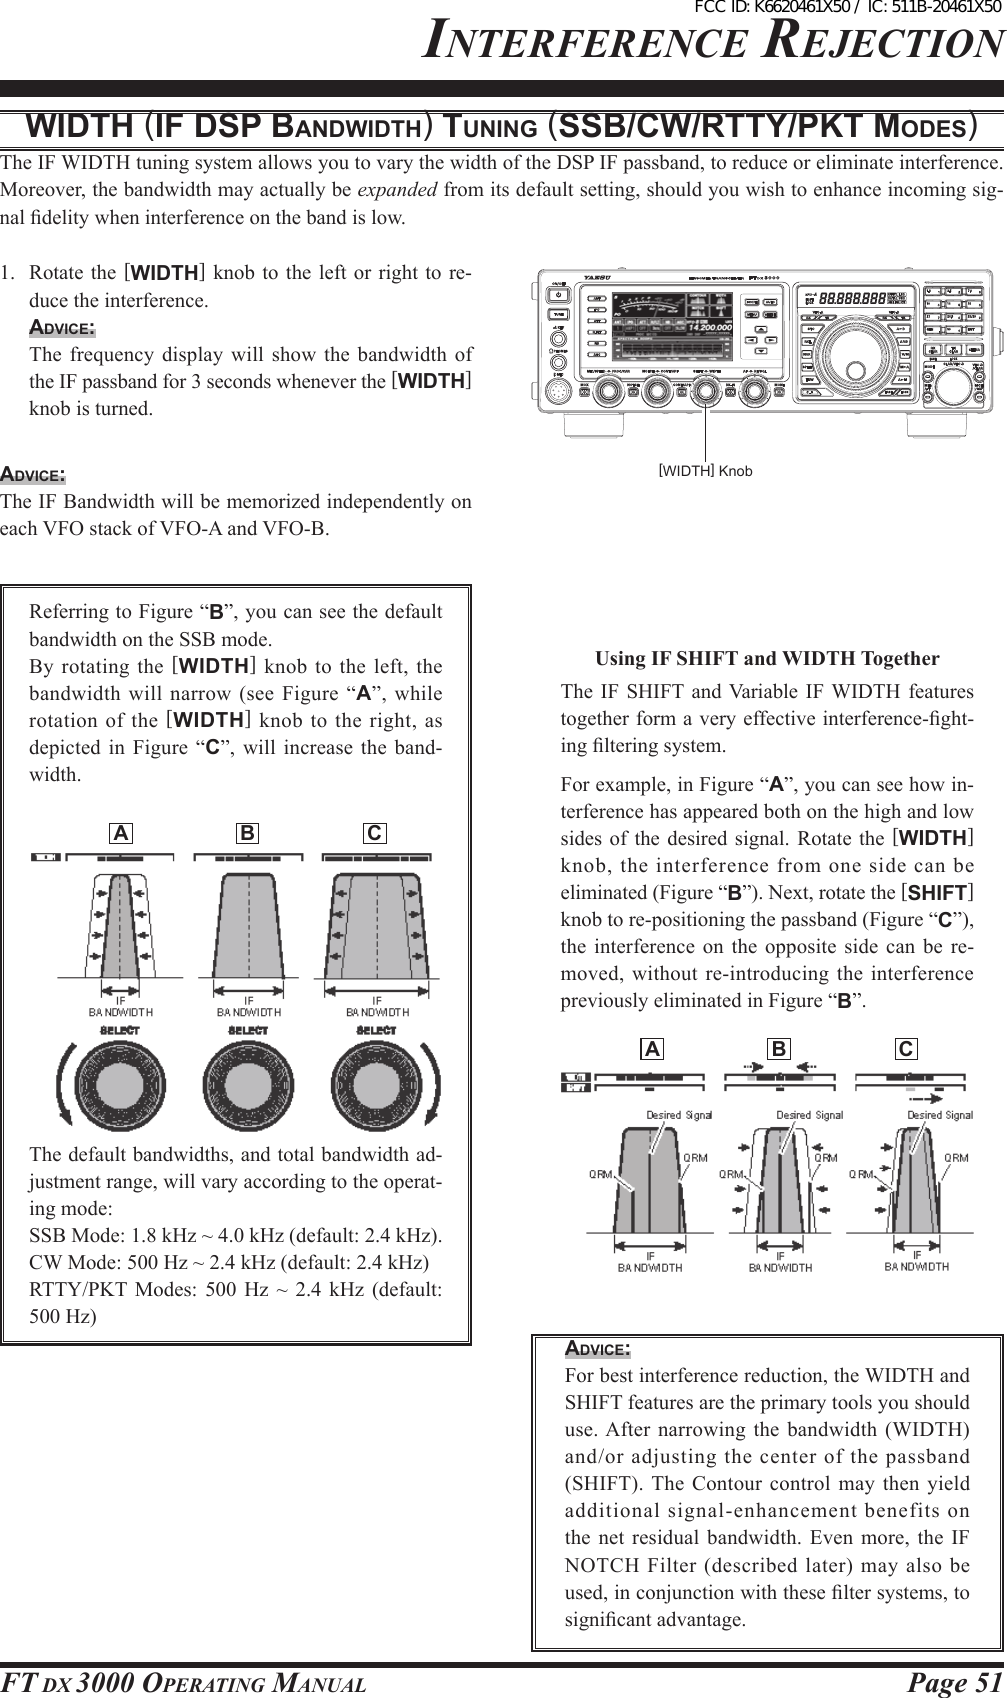 Page 51FT DX 3000 OperaTing ManualinTerFerence rejecTiOnwidtH (iF dsp bANdwidtH) tuNiNg (ssb/cw/Rtty/pKt Modes)The IF WIDTH tuning system allows you to vary the width of the DSP IF passband, to reduce or eliminate interference. Moreover, the bandwidth may actually be expanded from its default setting, should you wish to enhance incoming sig-nal delity when interference on the band is low.1.  Rotate the [WIDTH] knob to the left or right to  re-duce the interference.Advice:   The frequency  display will show the bandwidth of the IF passband for 3 seconds whenever the [WIDTH] knob is turned.[WIDTH] KnobAdvice:The IF Bandwidth will be memorized independently on each VFO stack of VFO-A and VFO-B.Referring to Figure “B”, you can see the default bandwidth on the SSB mode.By rotating the  [WIDTH]  knob to the left, the bandwidth will narrow (see Figure “A”, while rotation of  the [WIDTH] knob to the right, as depicted in Figure  “C”,  will  increase  the  band-width.  A  B  CThe default bandwidths, and total bandwidth ad-justment range, will vary according to the operat-ing mode:SSB Mode: 1.8 kHz ~ 4.0 kHz (default: 2.4 kHz).CW Mode: 500 Hz ~ 2.4 kHz (default: 2.4 kHz)RTTY/PKT Modes:  500  Hz  ~  2.4  kHz  (default: 500 Hz)UsingIFSHIFTandWIDTHTogetherThe IF  SHIFT and Variable  IF WIDTH  features together form a very effective interference-ght-ing ltering system.For example, in Figure “A”, you can see how in-terference has appeared both on the high and low sides of the desired signal. Rotate the [WIDTH] knob, the interference from one side can be eliminated (Figure “B”). Next, rotate the [SHIFT] knob to re-positioning the passband (Figure “C”), the interference  on  the  opposite side can  be  re-moved, without  re-introducing the interference previously eliminated in Figure “B”.  A  B  CAdvice: For best interference reduction, the WIDTH and SHIFT features are the primary tools you should use. After  narrowing  the  bandwidth (WIDTH) and/or adjusting the center of the passband (SHIFT). The Contour control may  then yield additional signal-enhancement benefits on the net residual bandwidth. Even more, the IF NOTCH Filter (described later) may also be used, in conjunction with these lter systems, to signicant advantage.FCC ID: K6620461X50 / IC: 511B-20461X50